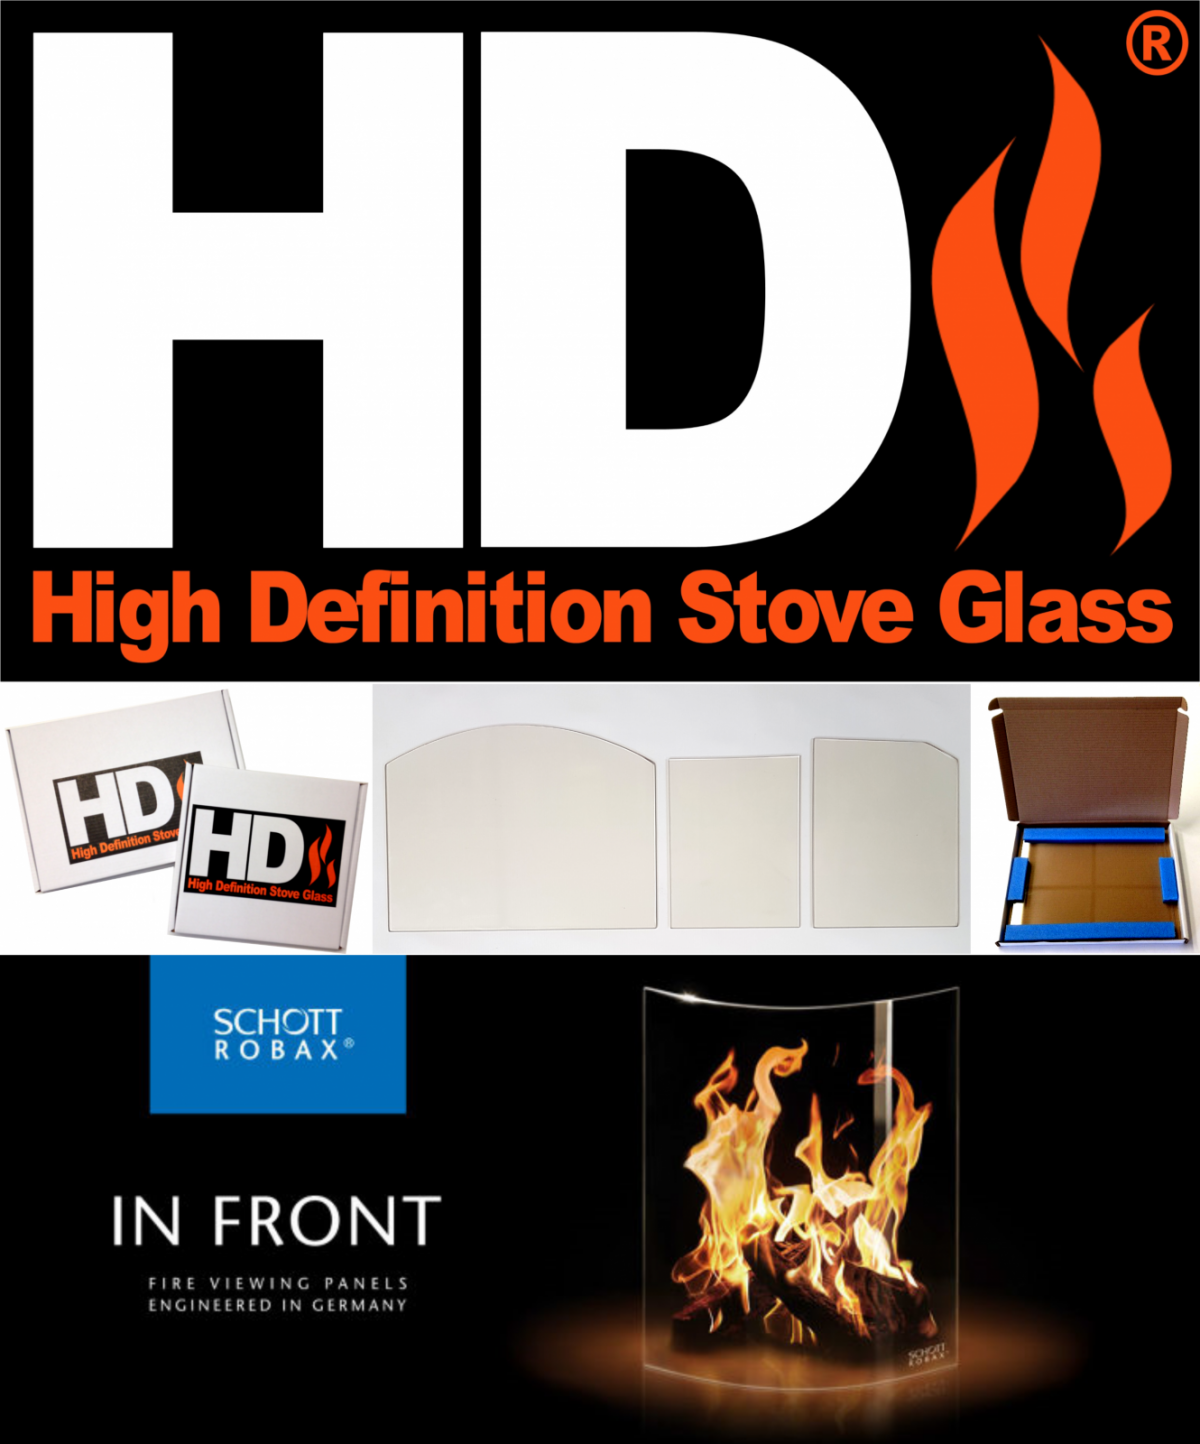 High Definition Stove Glass for the Casttec Juno